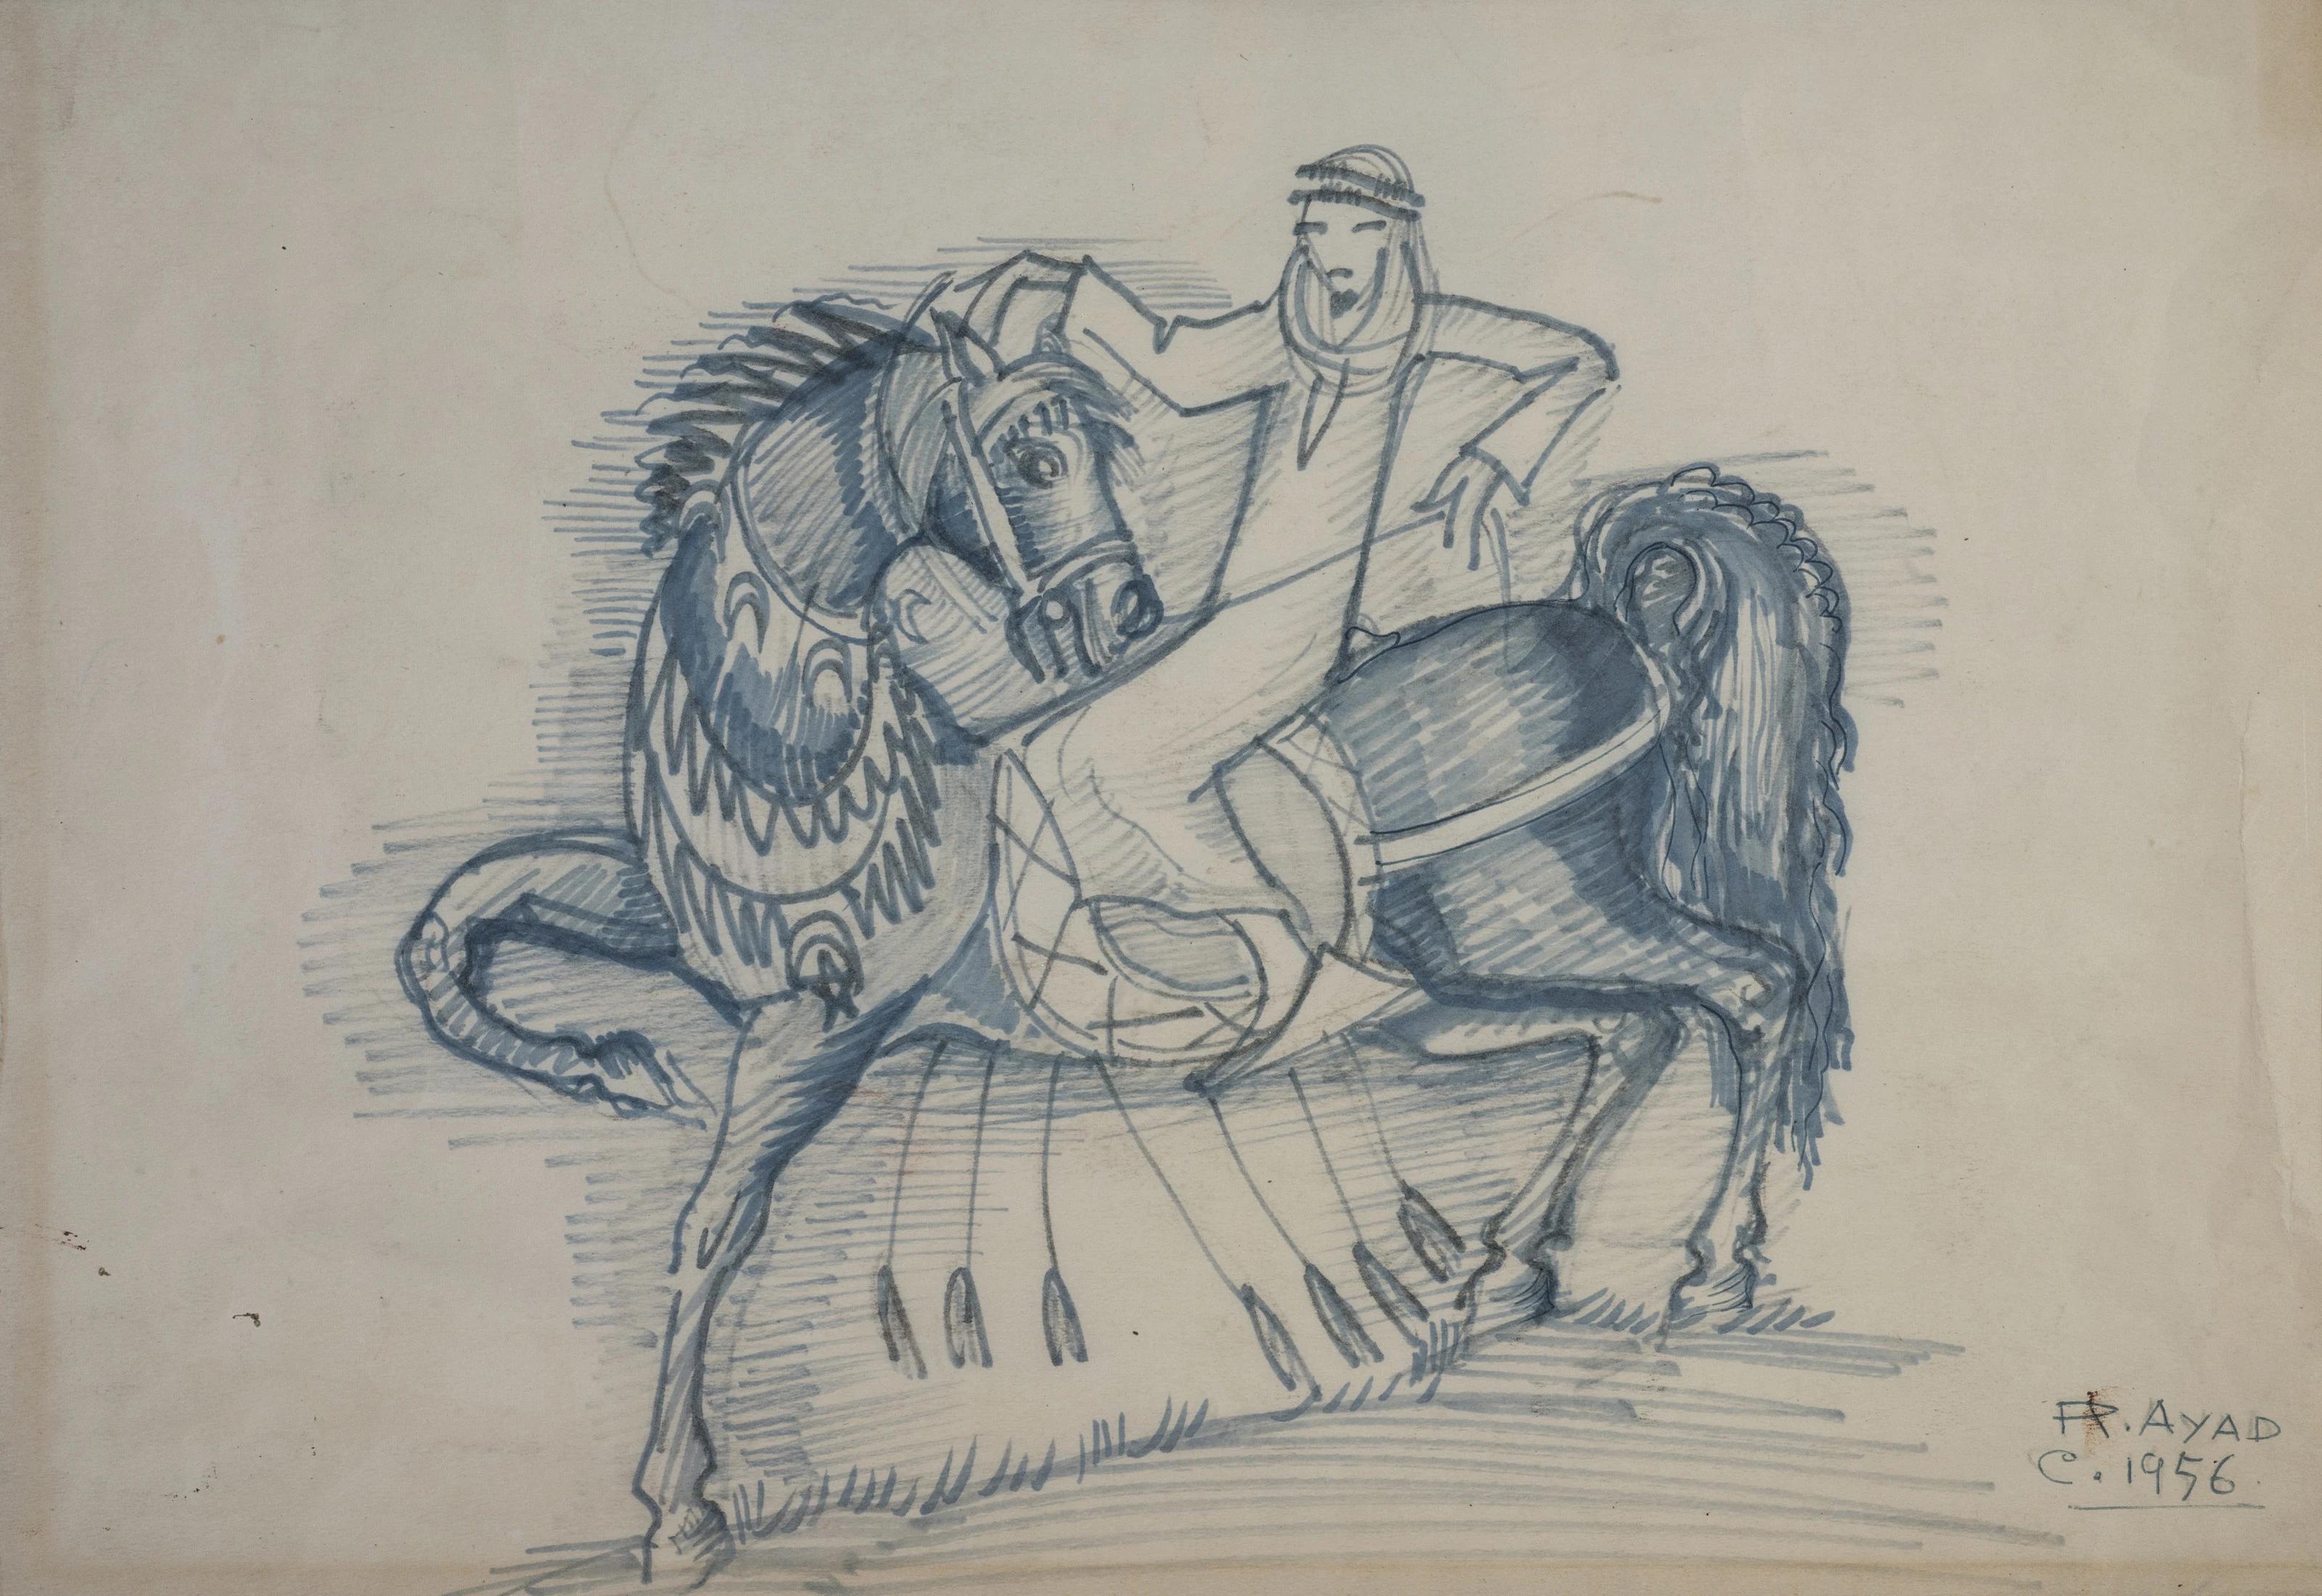 "Arabian Dressage" (double face) Painting 14" x 18" inch (1956) by Ragheb Ayad

signed & dated
Ink on Paper

Ragheb Ayad was born in Cairo on the 10th of March 1892 and inscribed himself in the School of Fine Arts since its opening in 1908. After